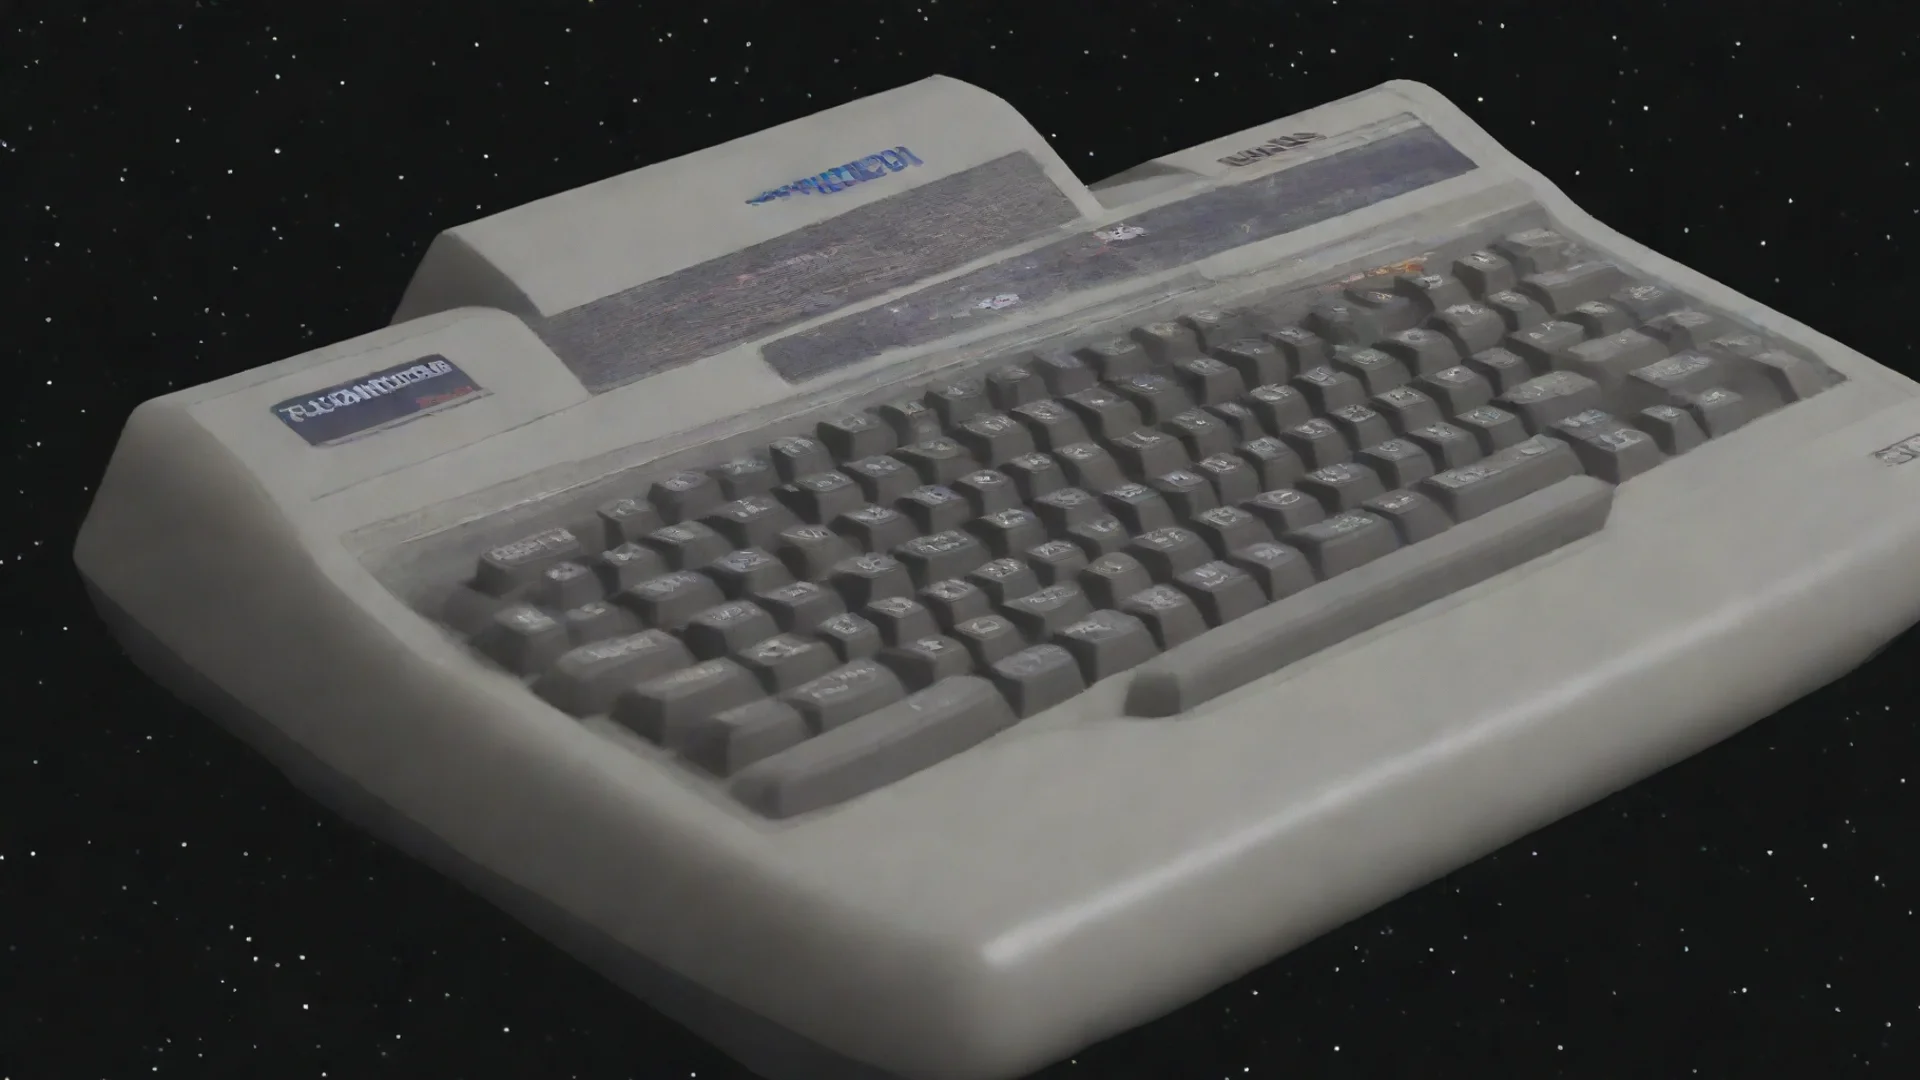 aiamazing commodore 64 spaceship 200x160 pixels awesome portrait 2 wide